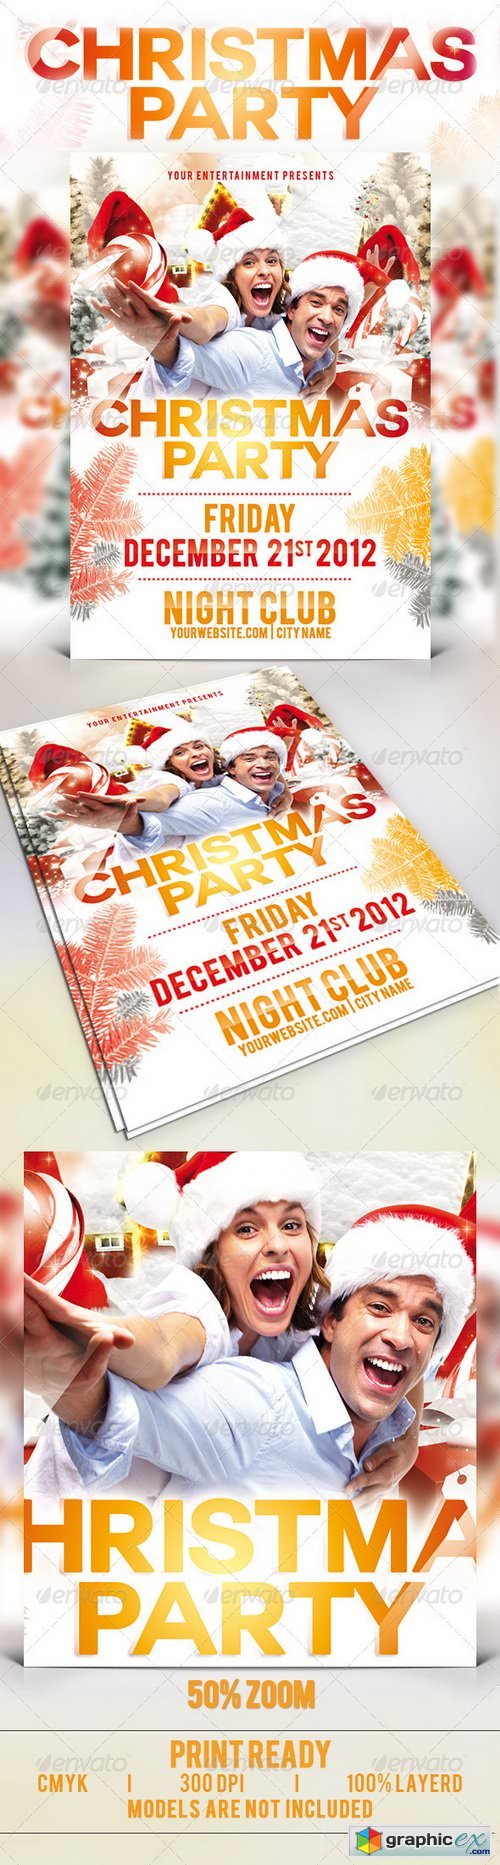 Christmas Party Flyer Template 3362560